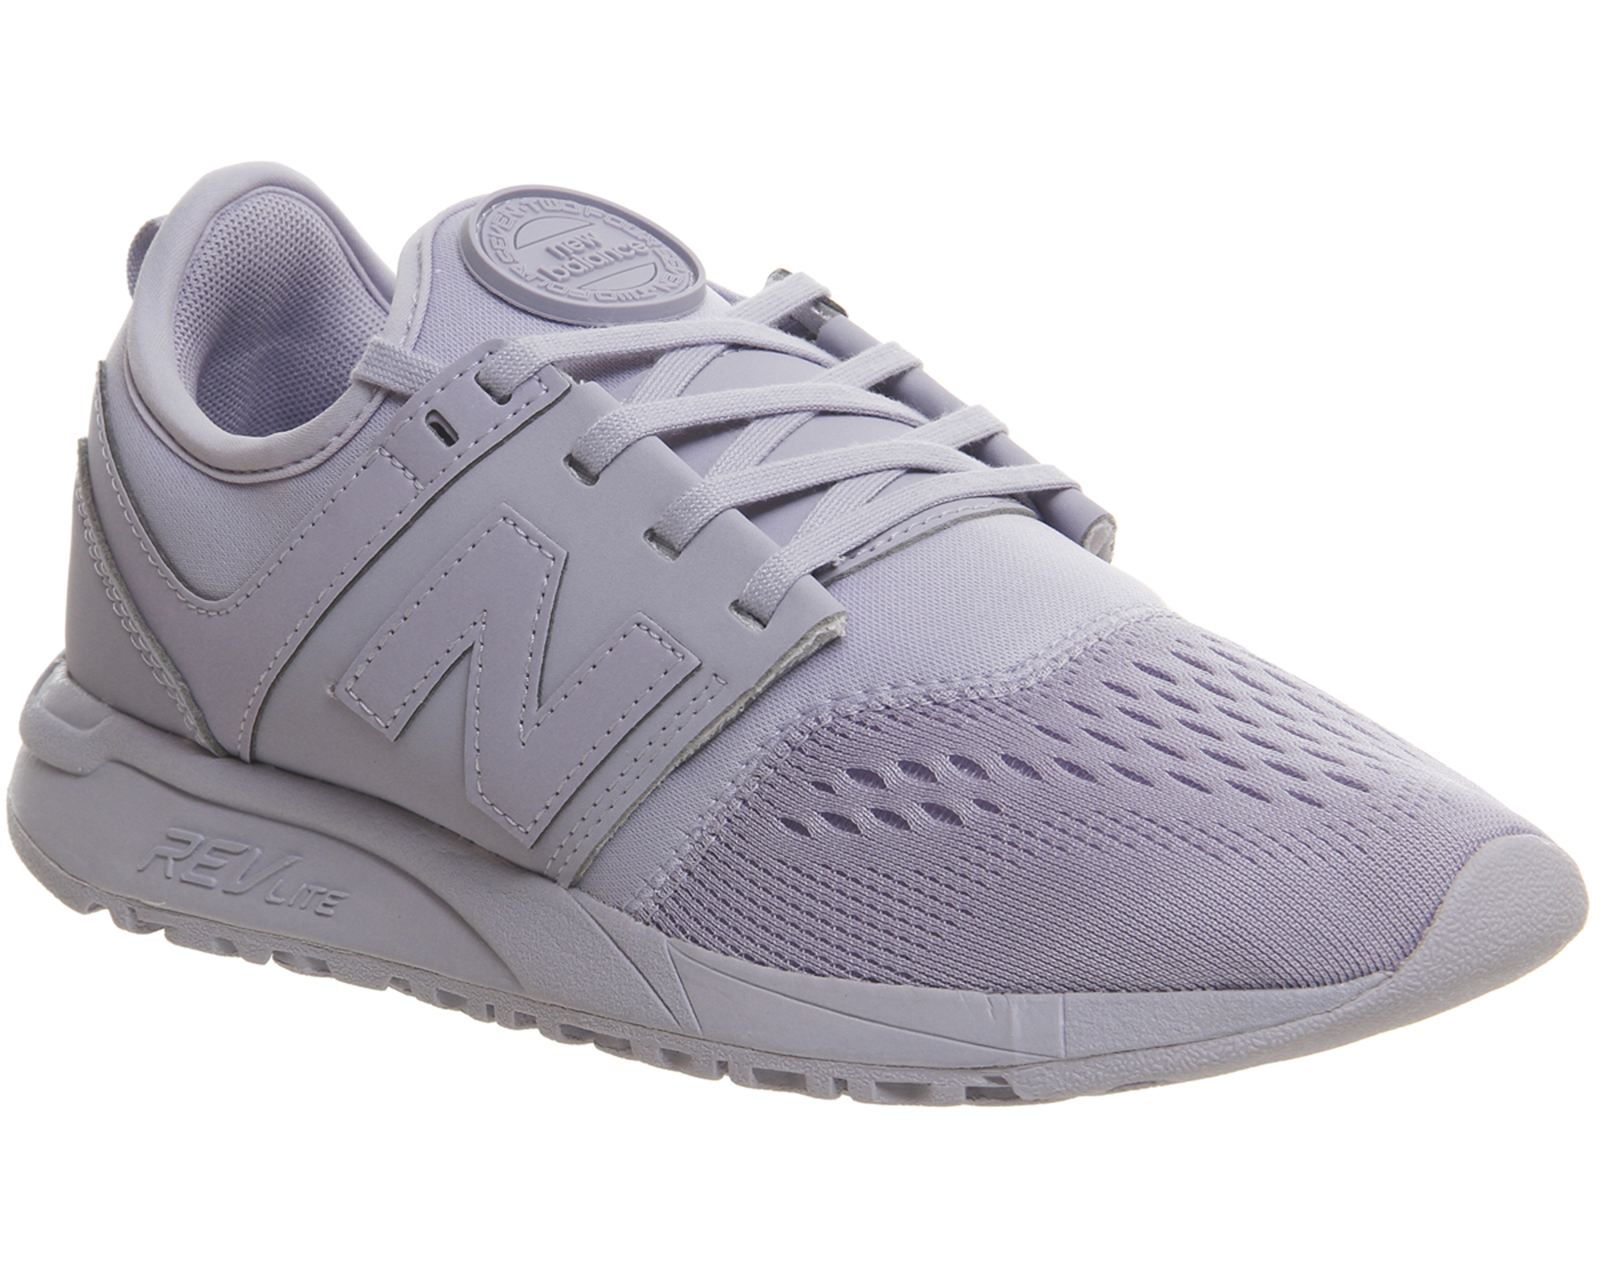 New Balance 247 Lilac - His trainers